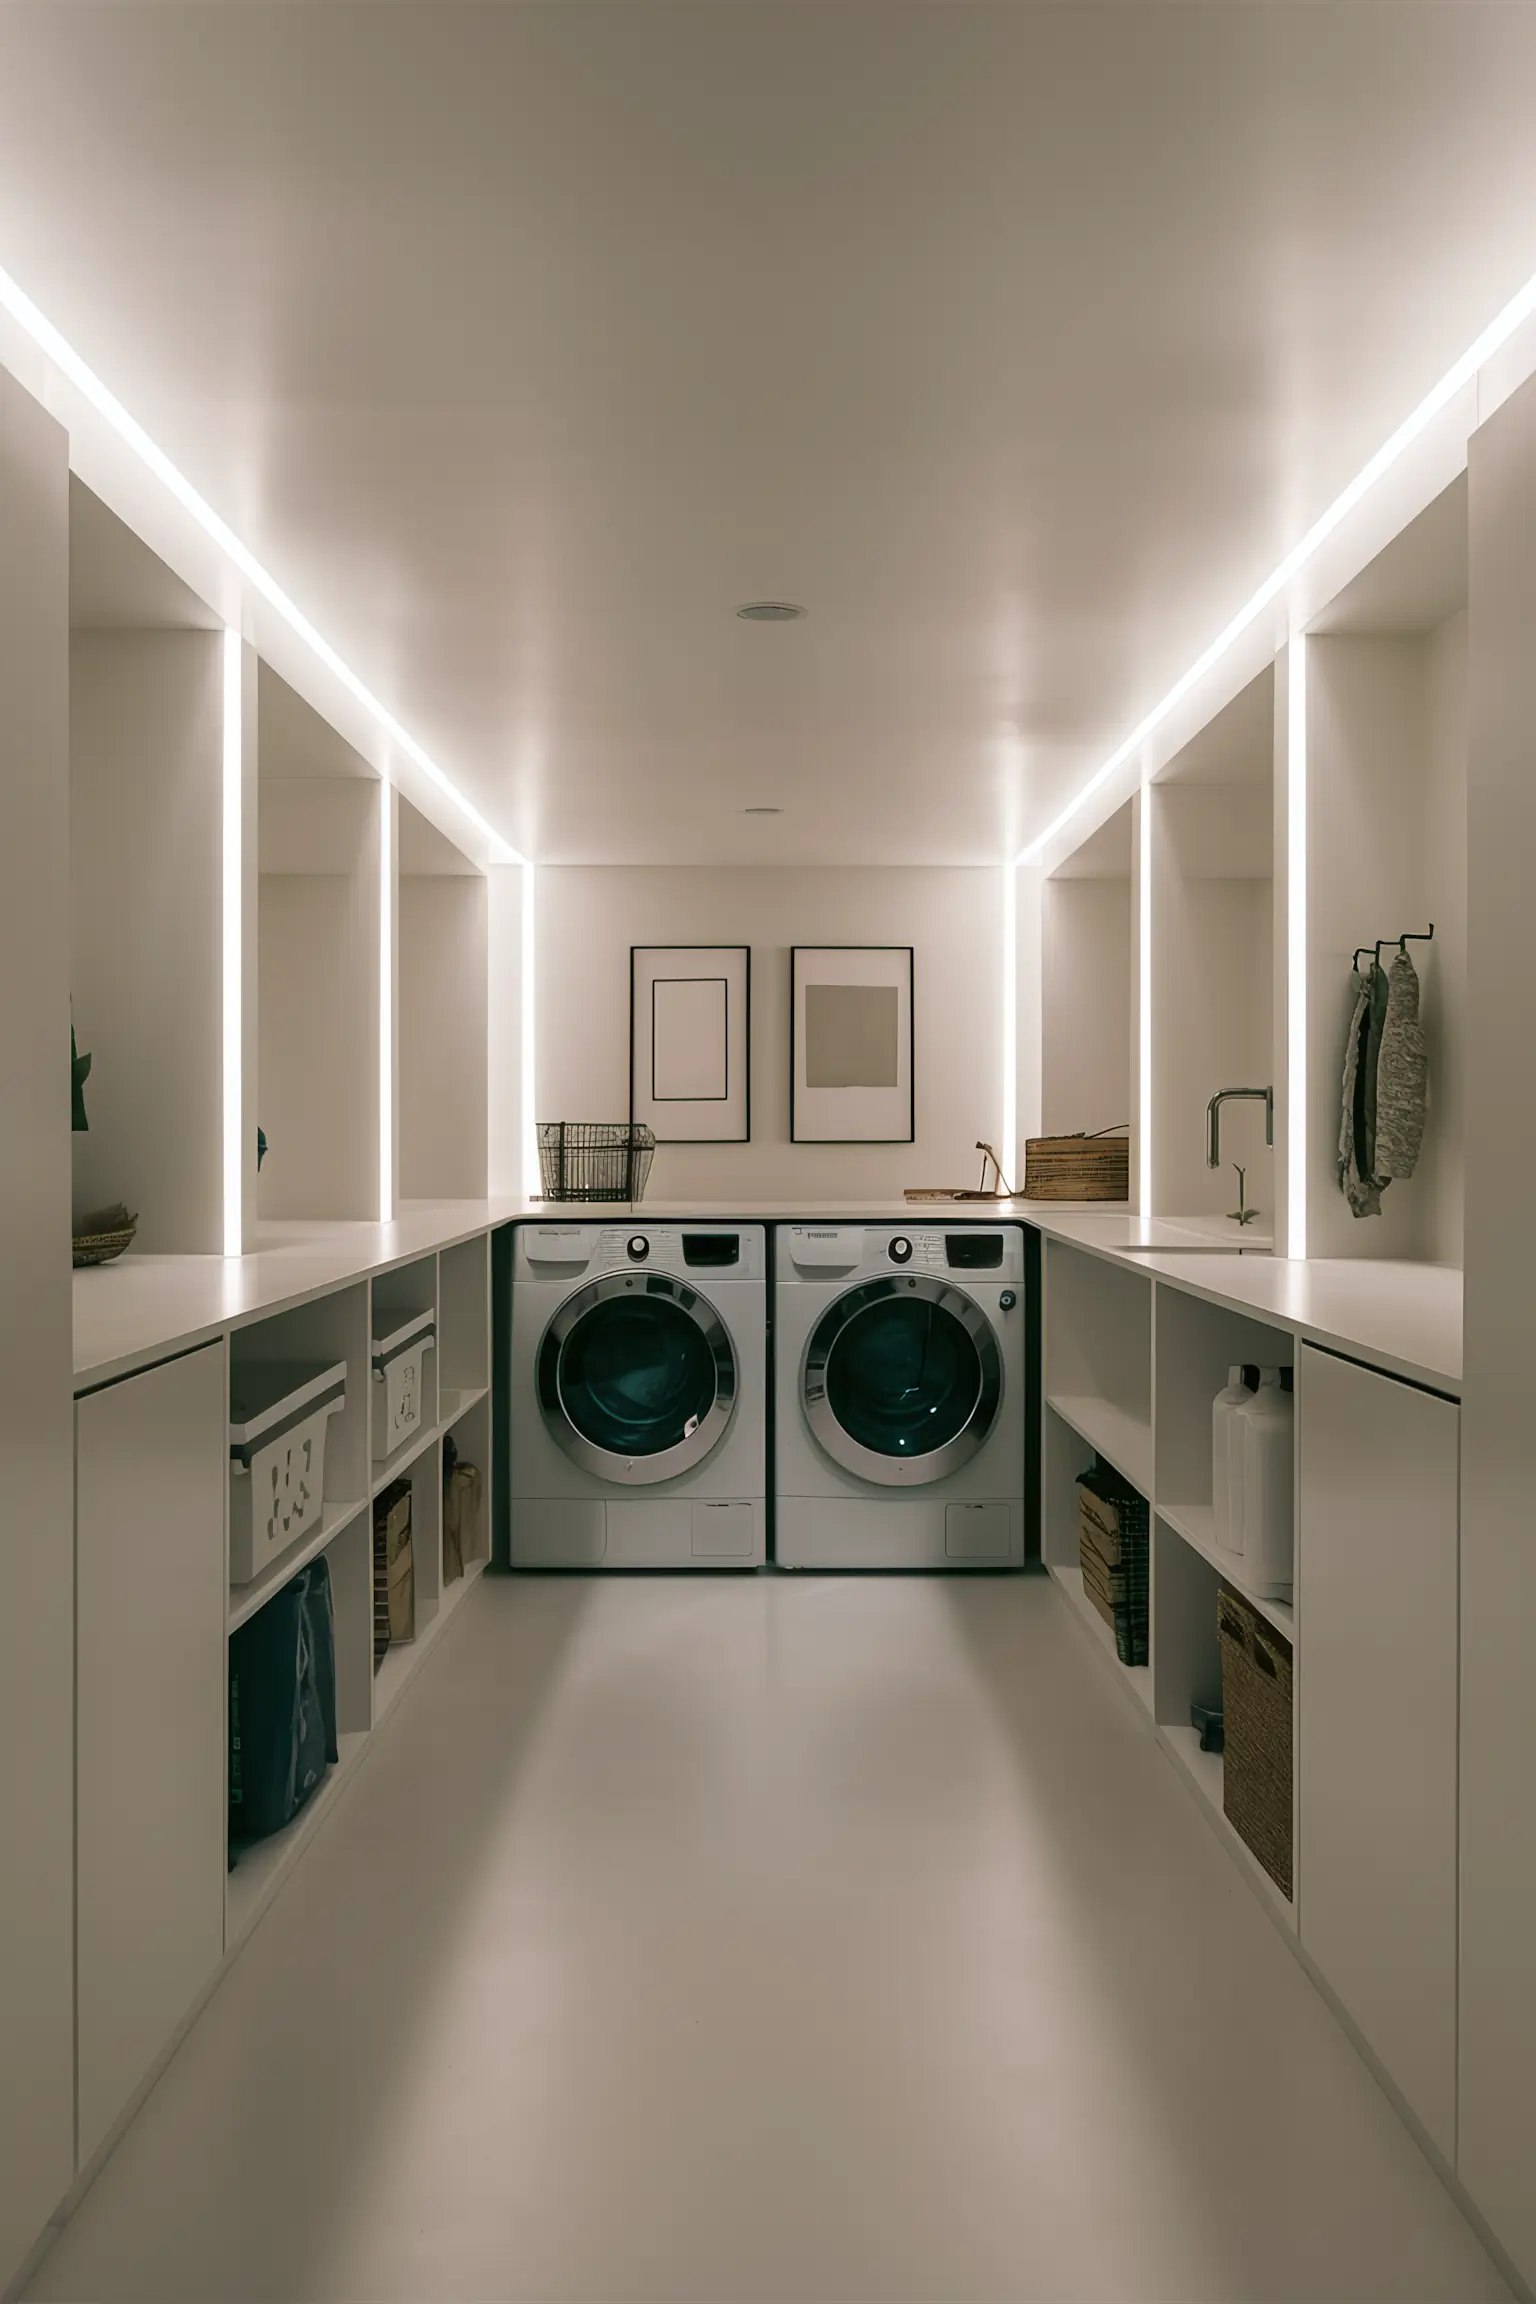 Minimalistic basement laundry room with modern appliances and organized storage.